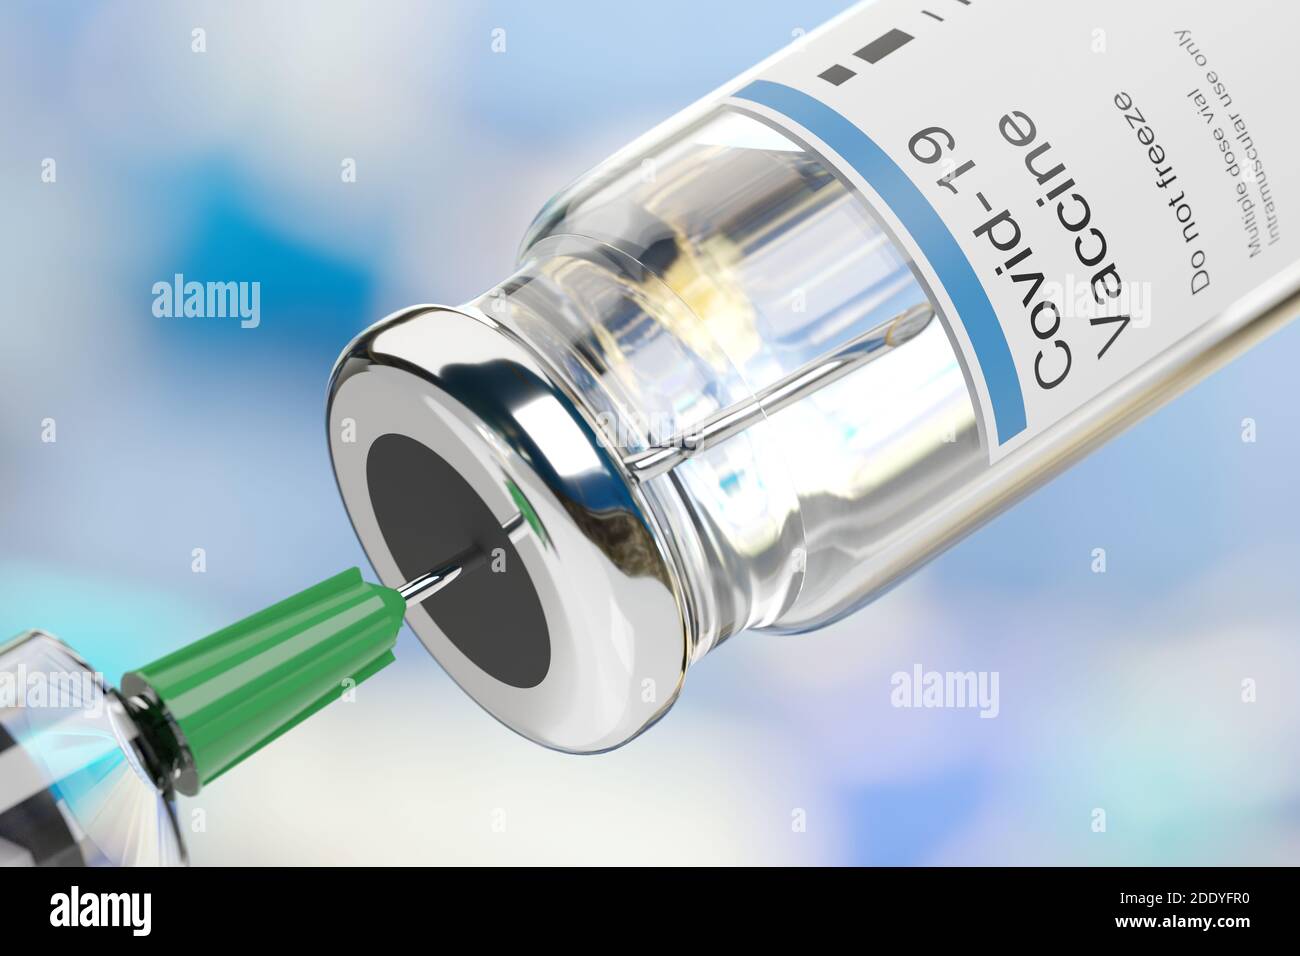 Covid -19 vaccine vial and injection syringe on blue background. 3d illustration. Stock Photo